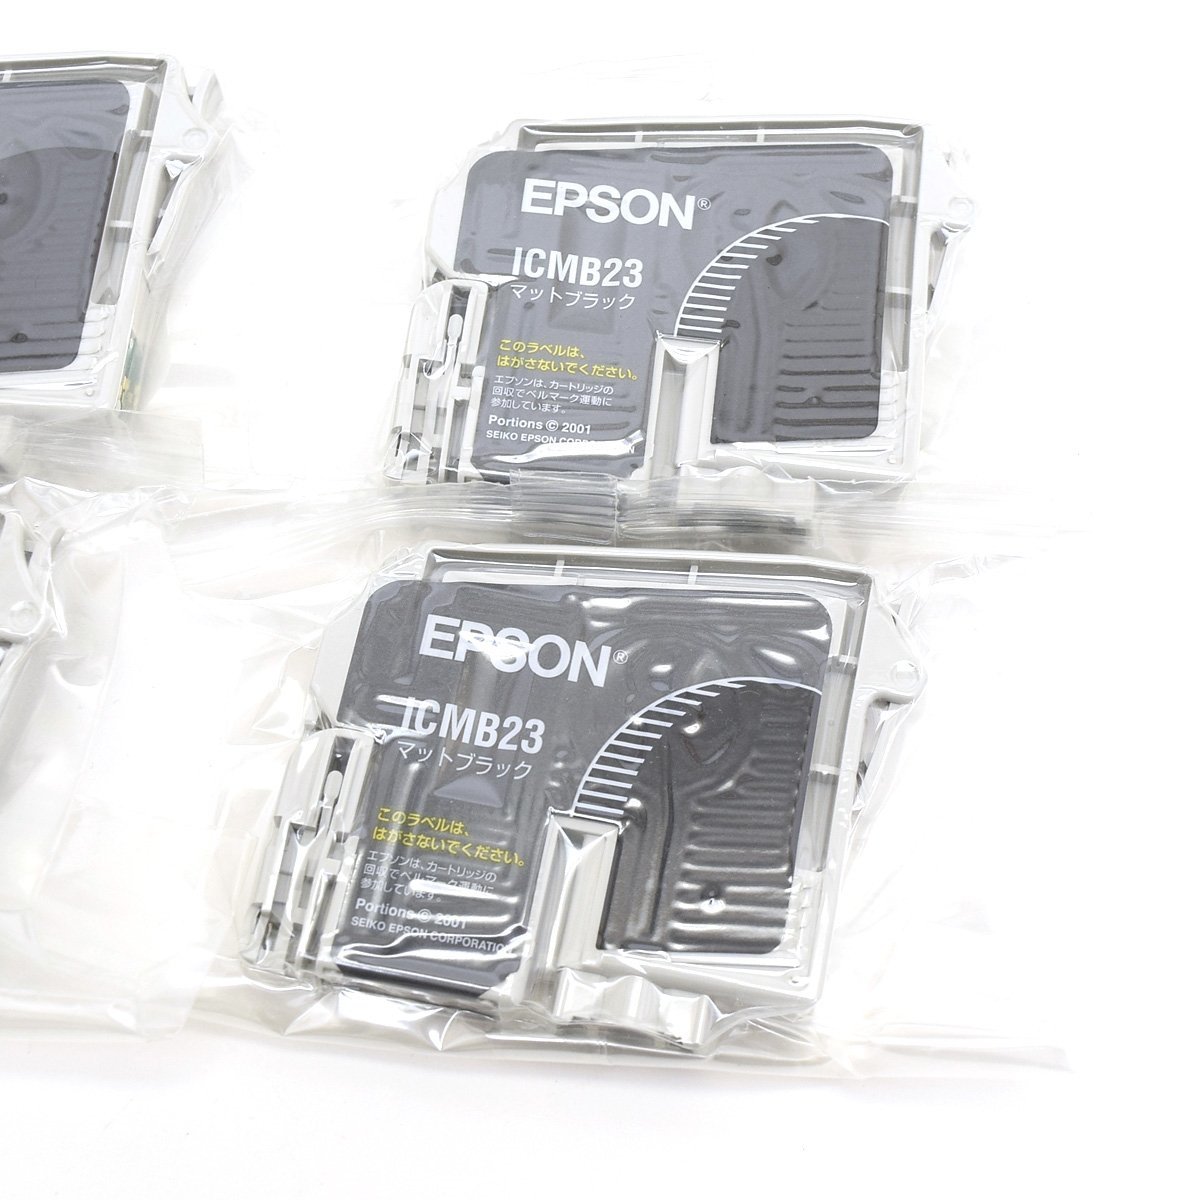 ▽467977 EPSON エプソン 純正インク ICBK23 ICMB23 ICC23 ICM23 4色 6本セット 未使用 使用期限不明 ジャンク品扱い_画像4